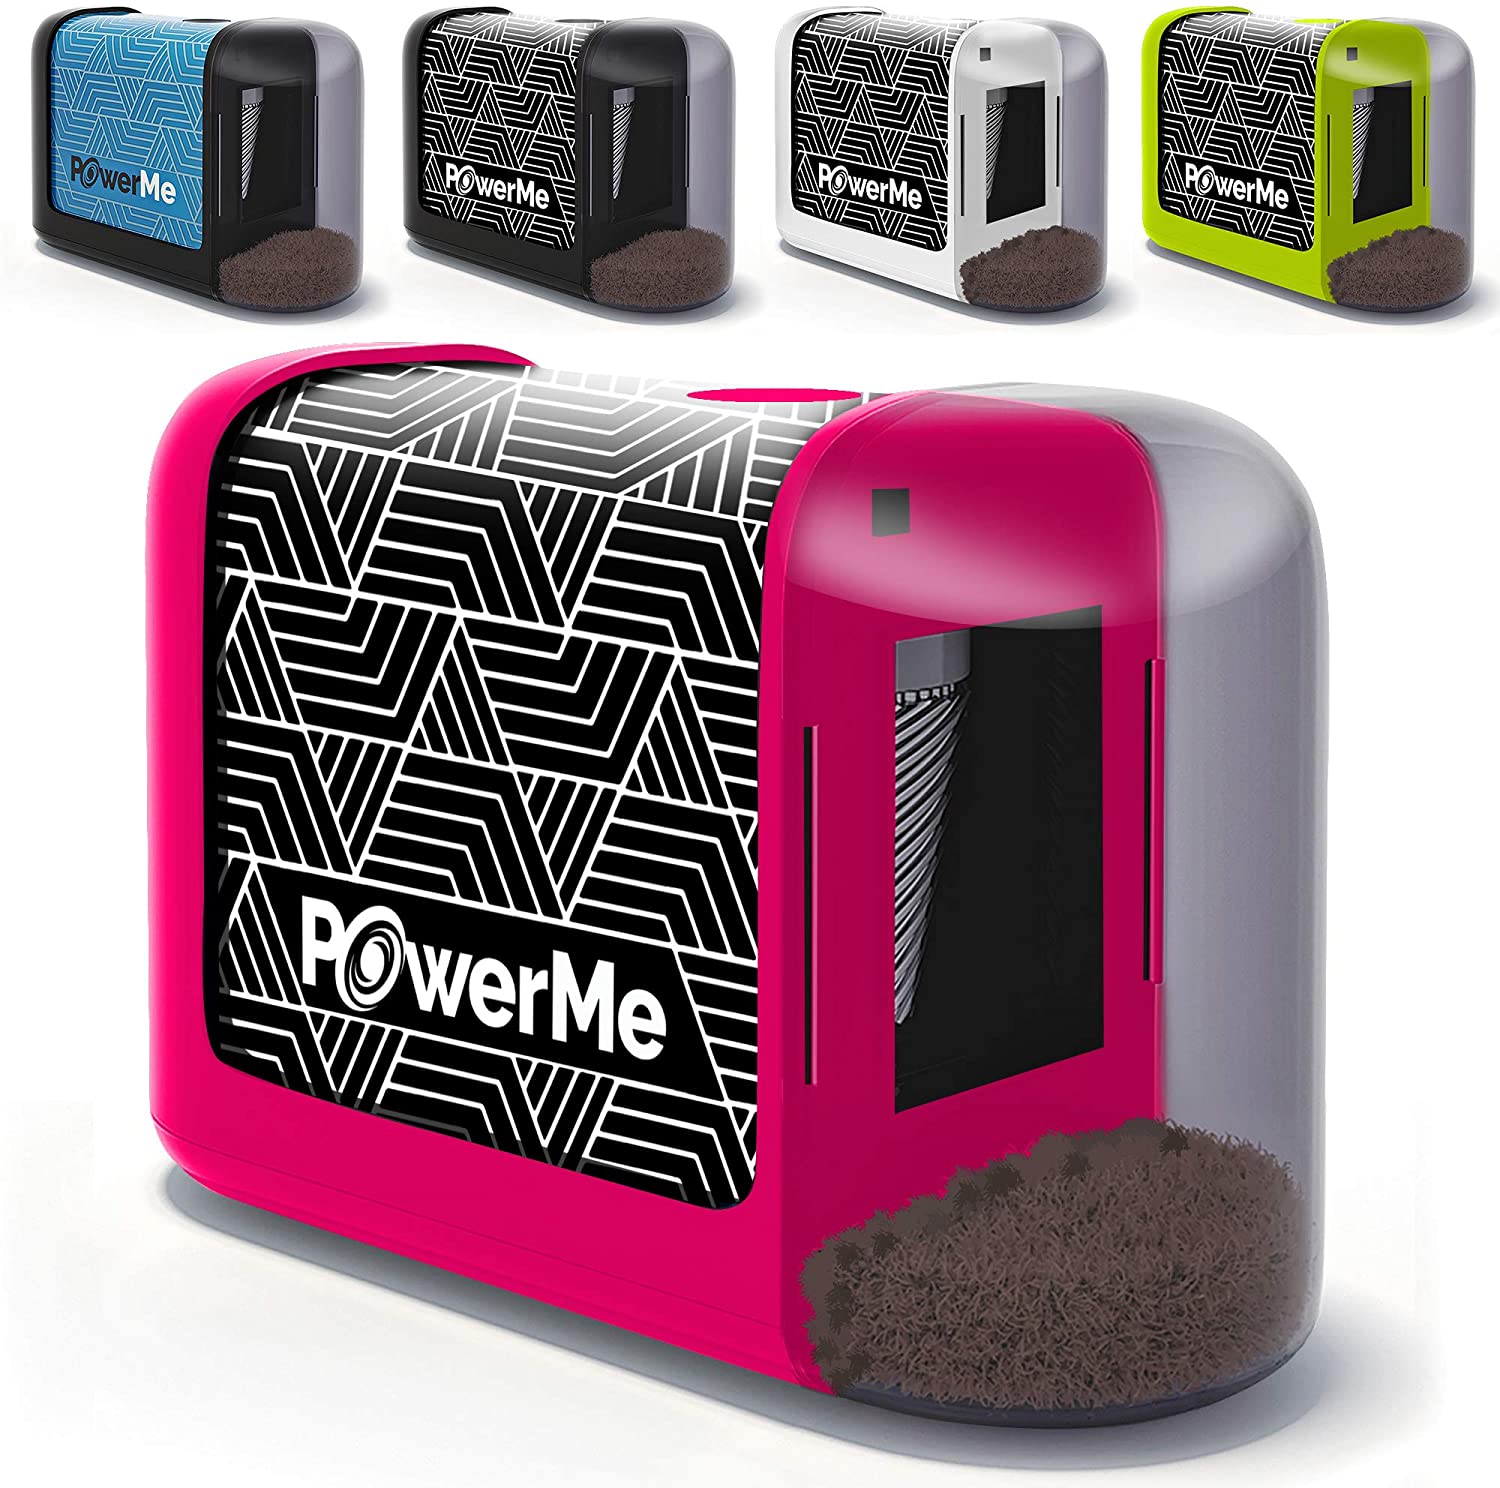 a group of colorful objects with text: 'POwerMe POwerMe PowerMe PowerMe PowerMe'